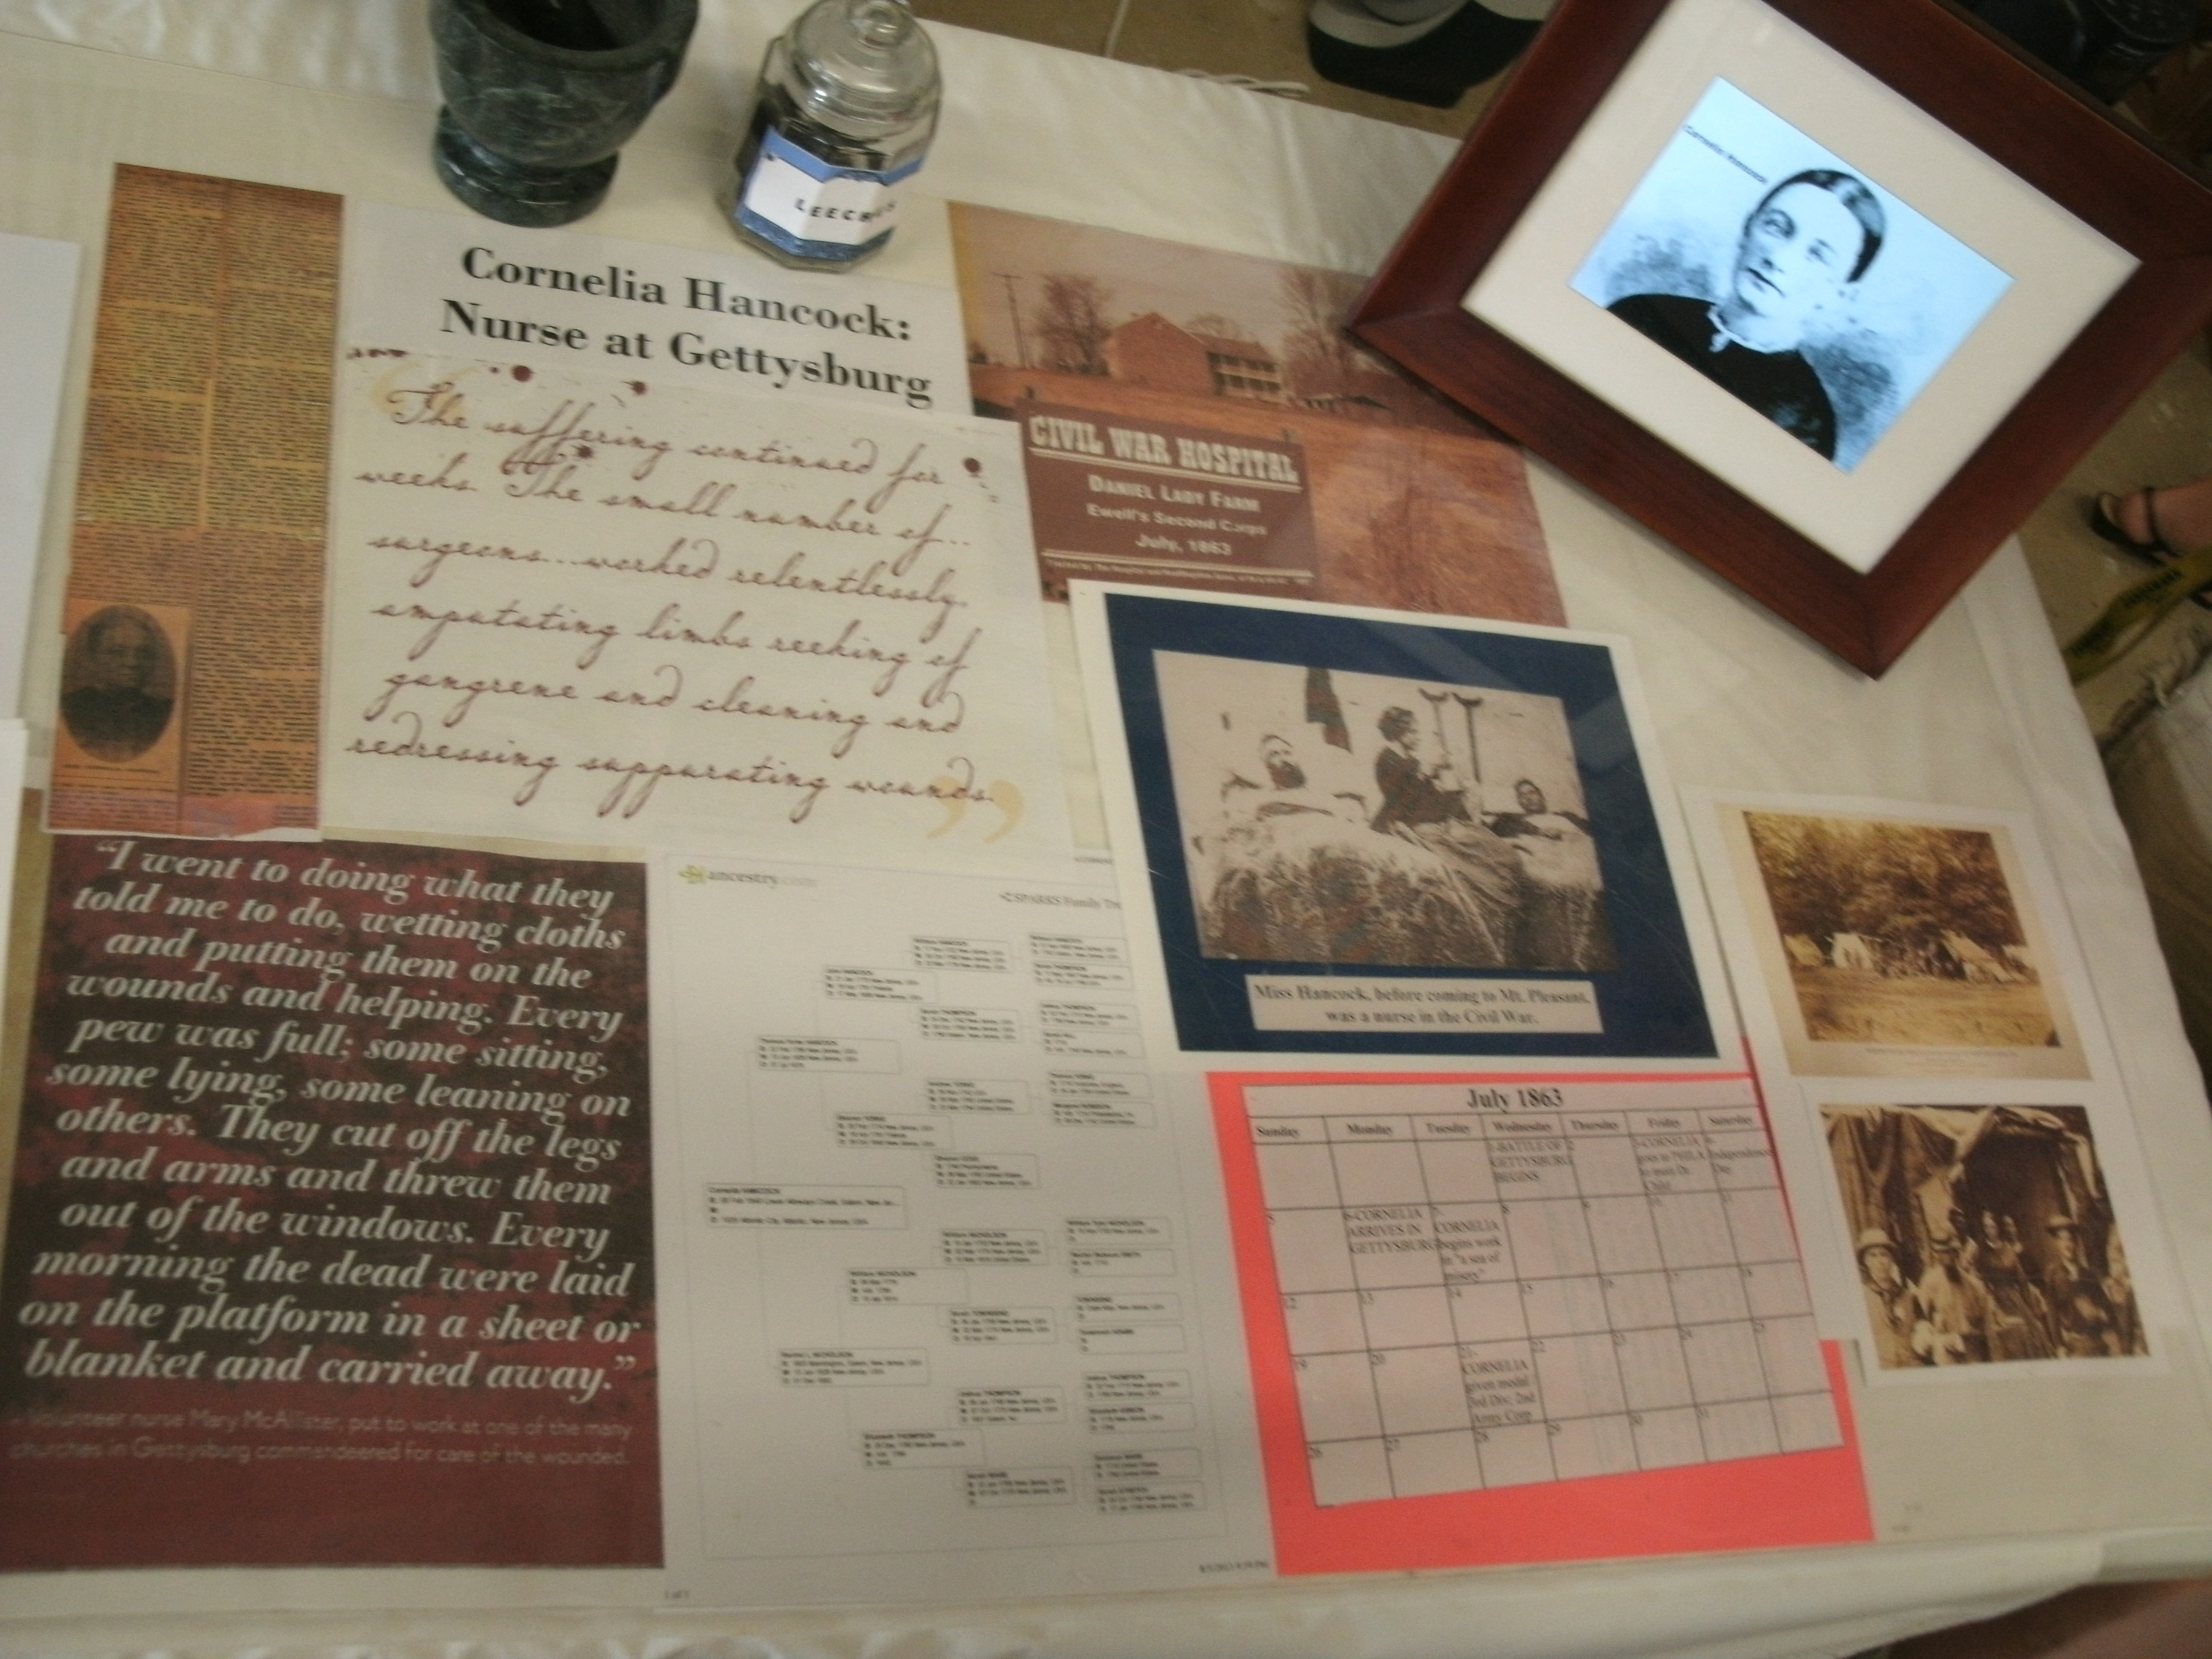 The display included information on the life of Cornelia Hancock, a Salem County native.